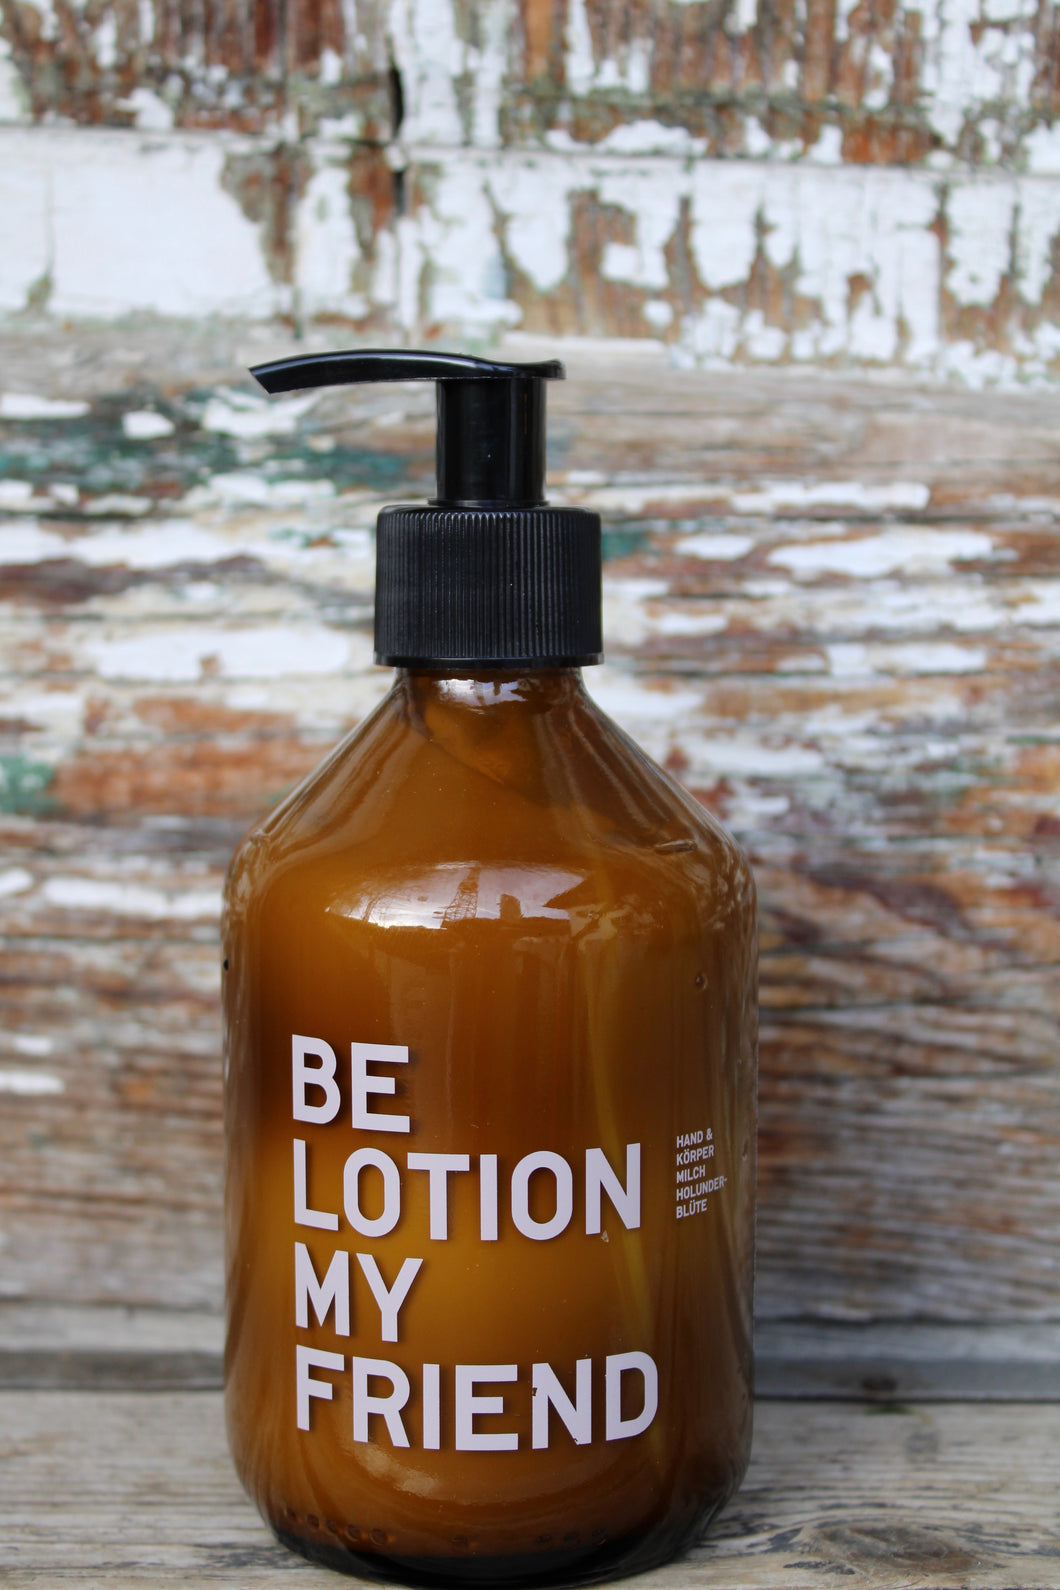 Be Lotion My Friend